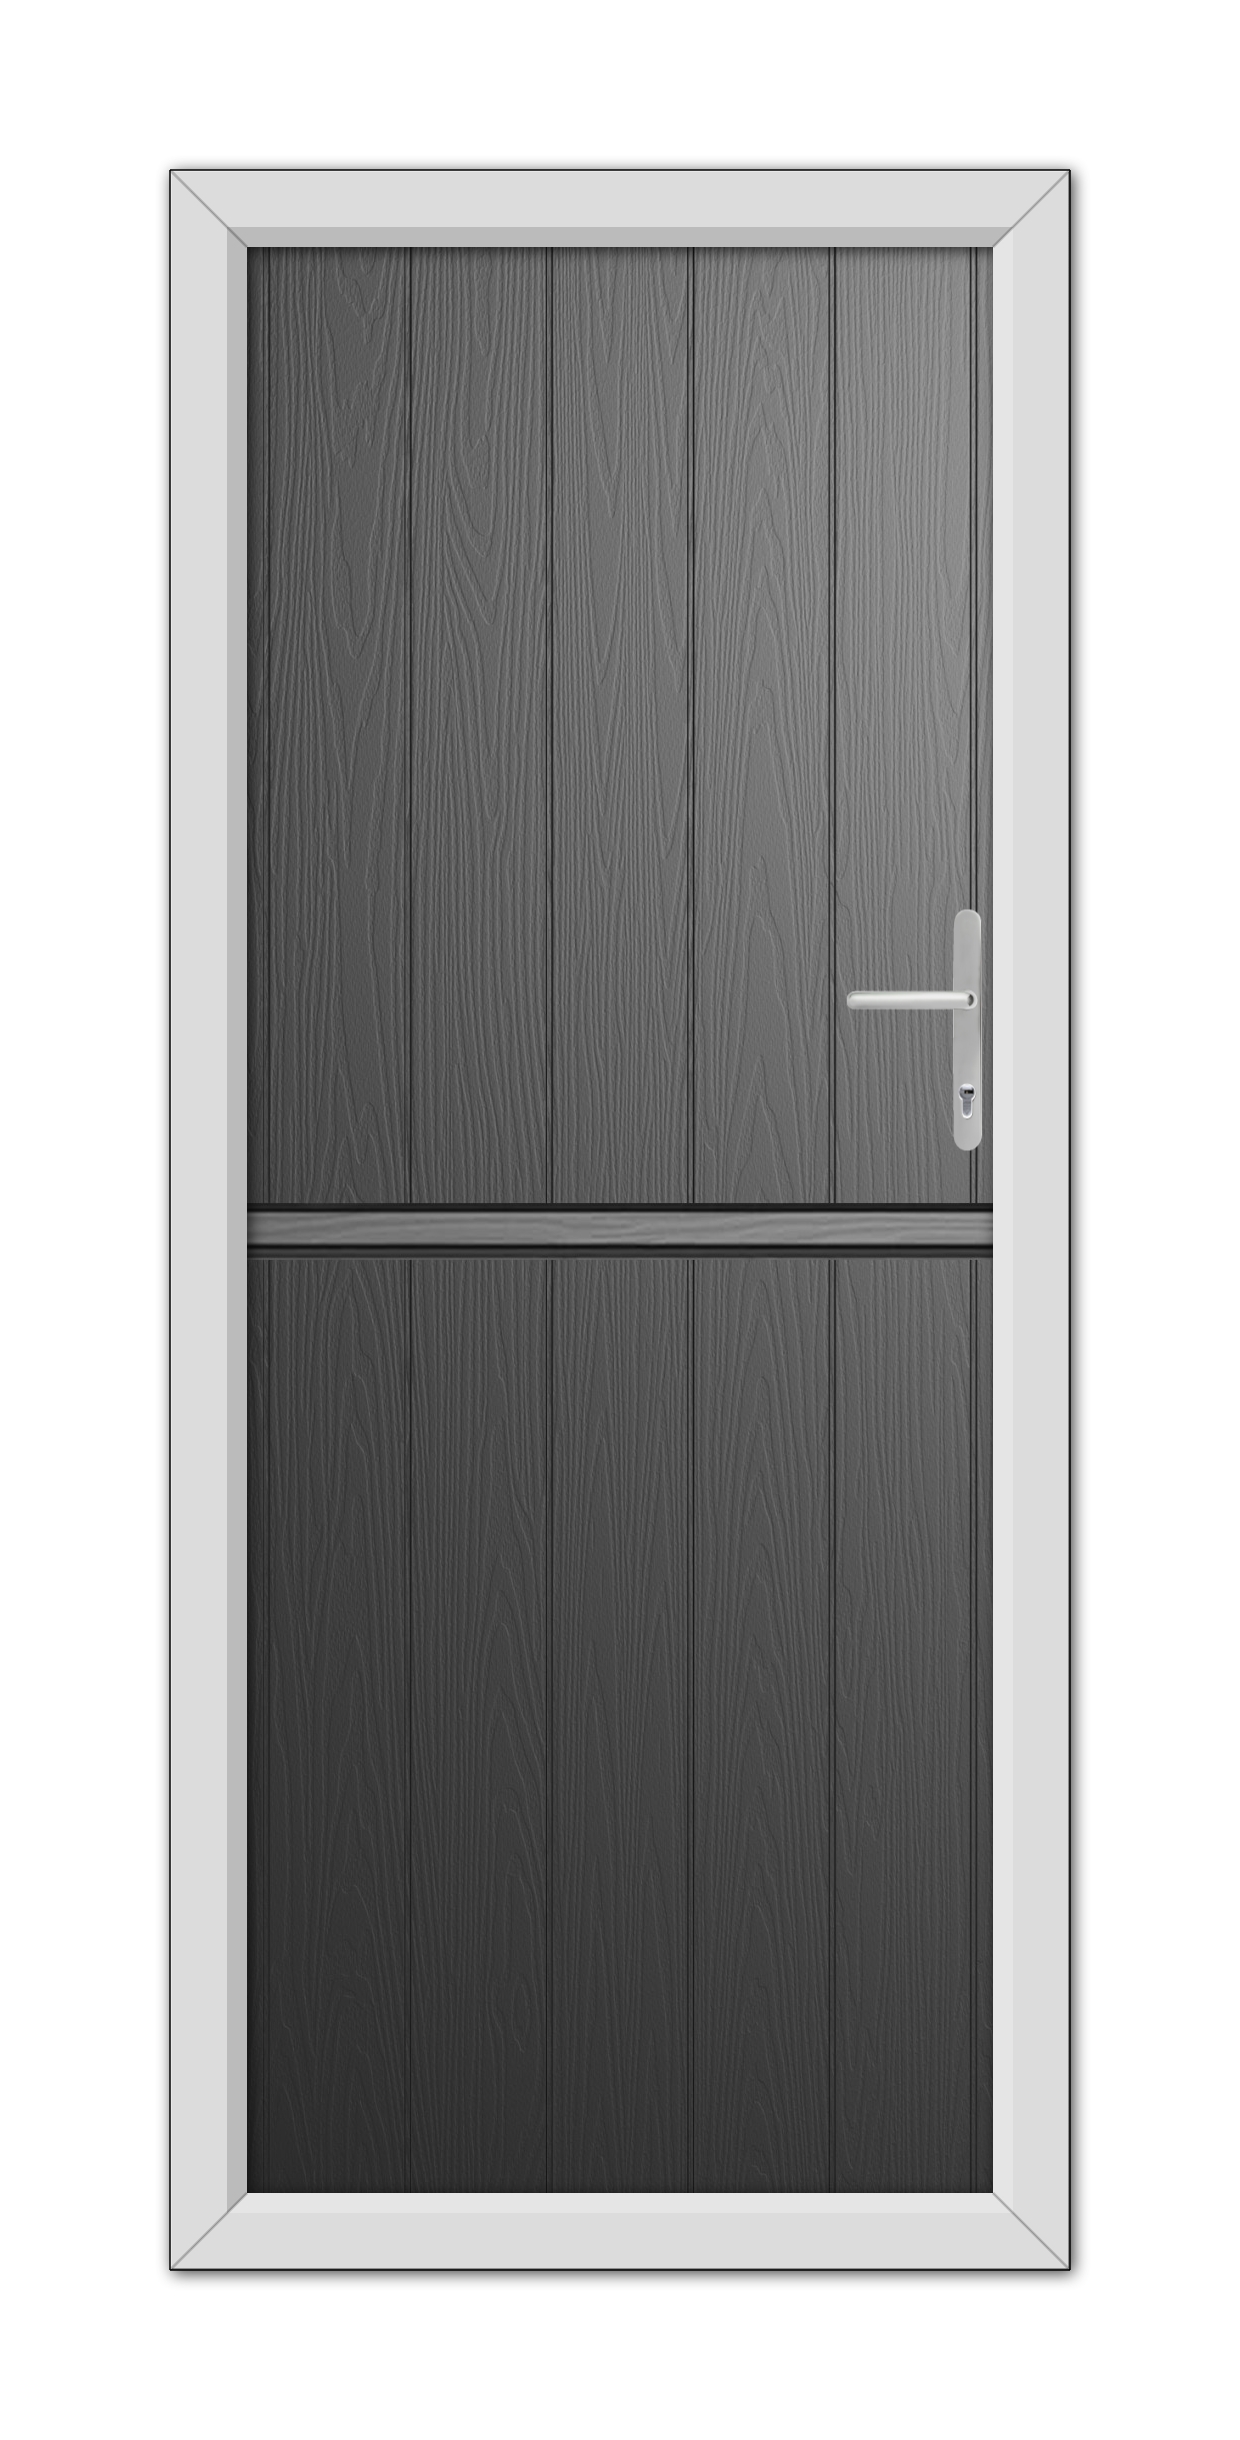 A modern Black Gloucester Stable Composite Door 48mm Timber Core with a silver handle, set in a light gray frame, viewed frontally.